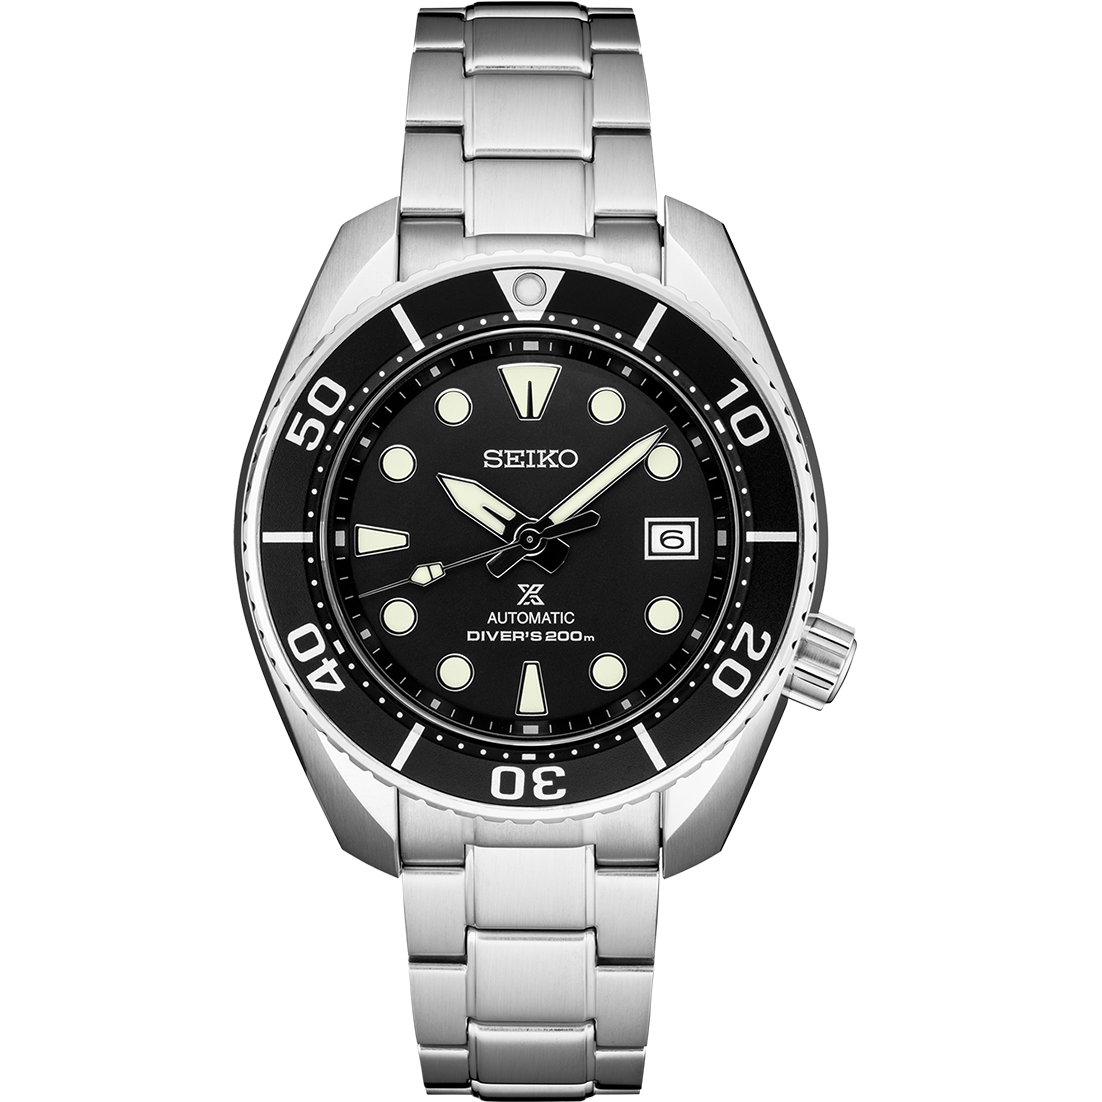 Seiko Prospex Diver's 200m Stainless Steel Automatic Watch (SPB101)